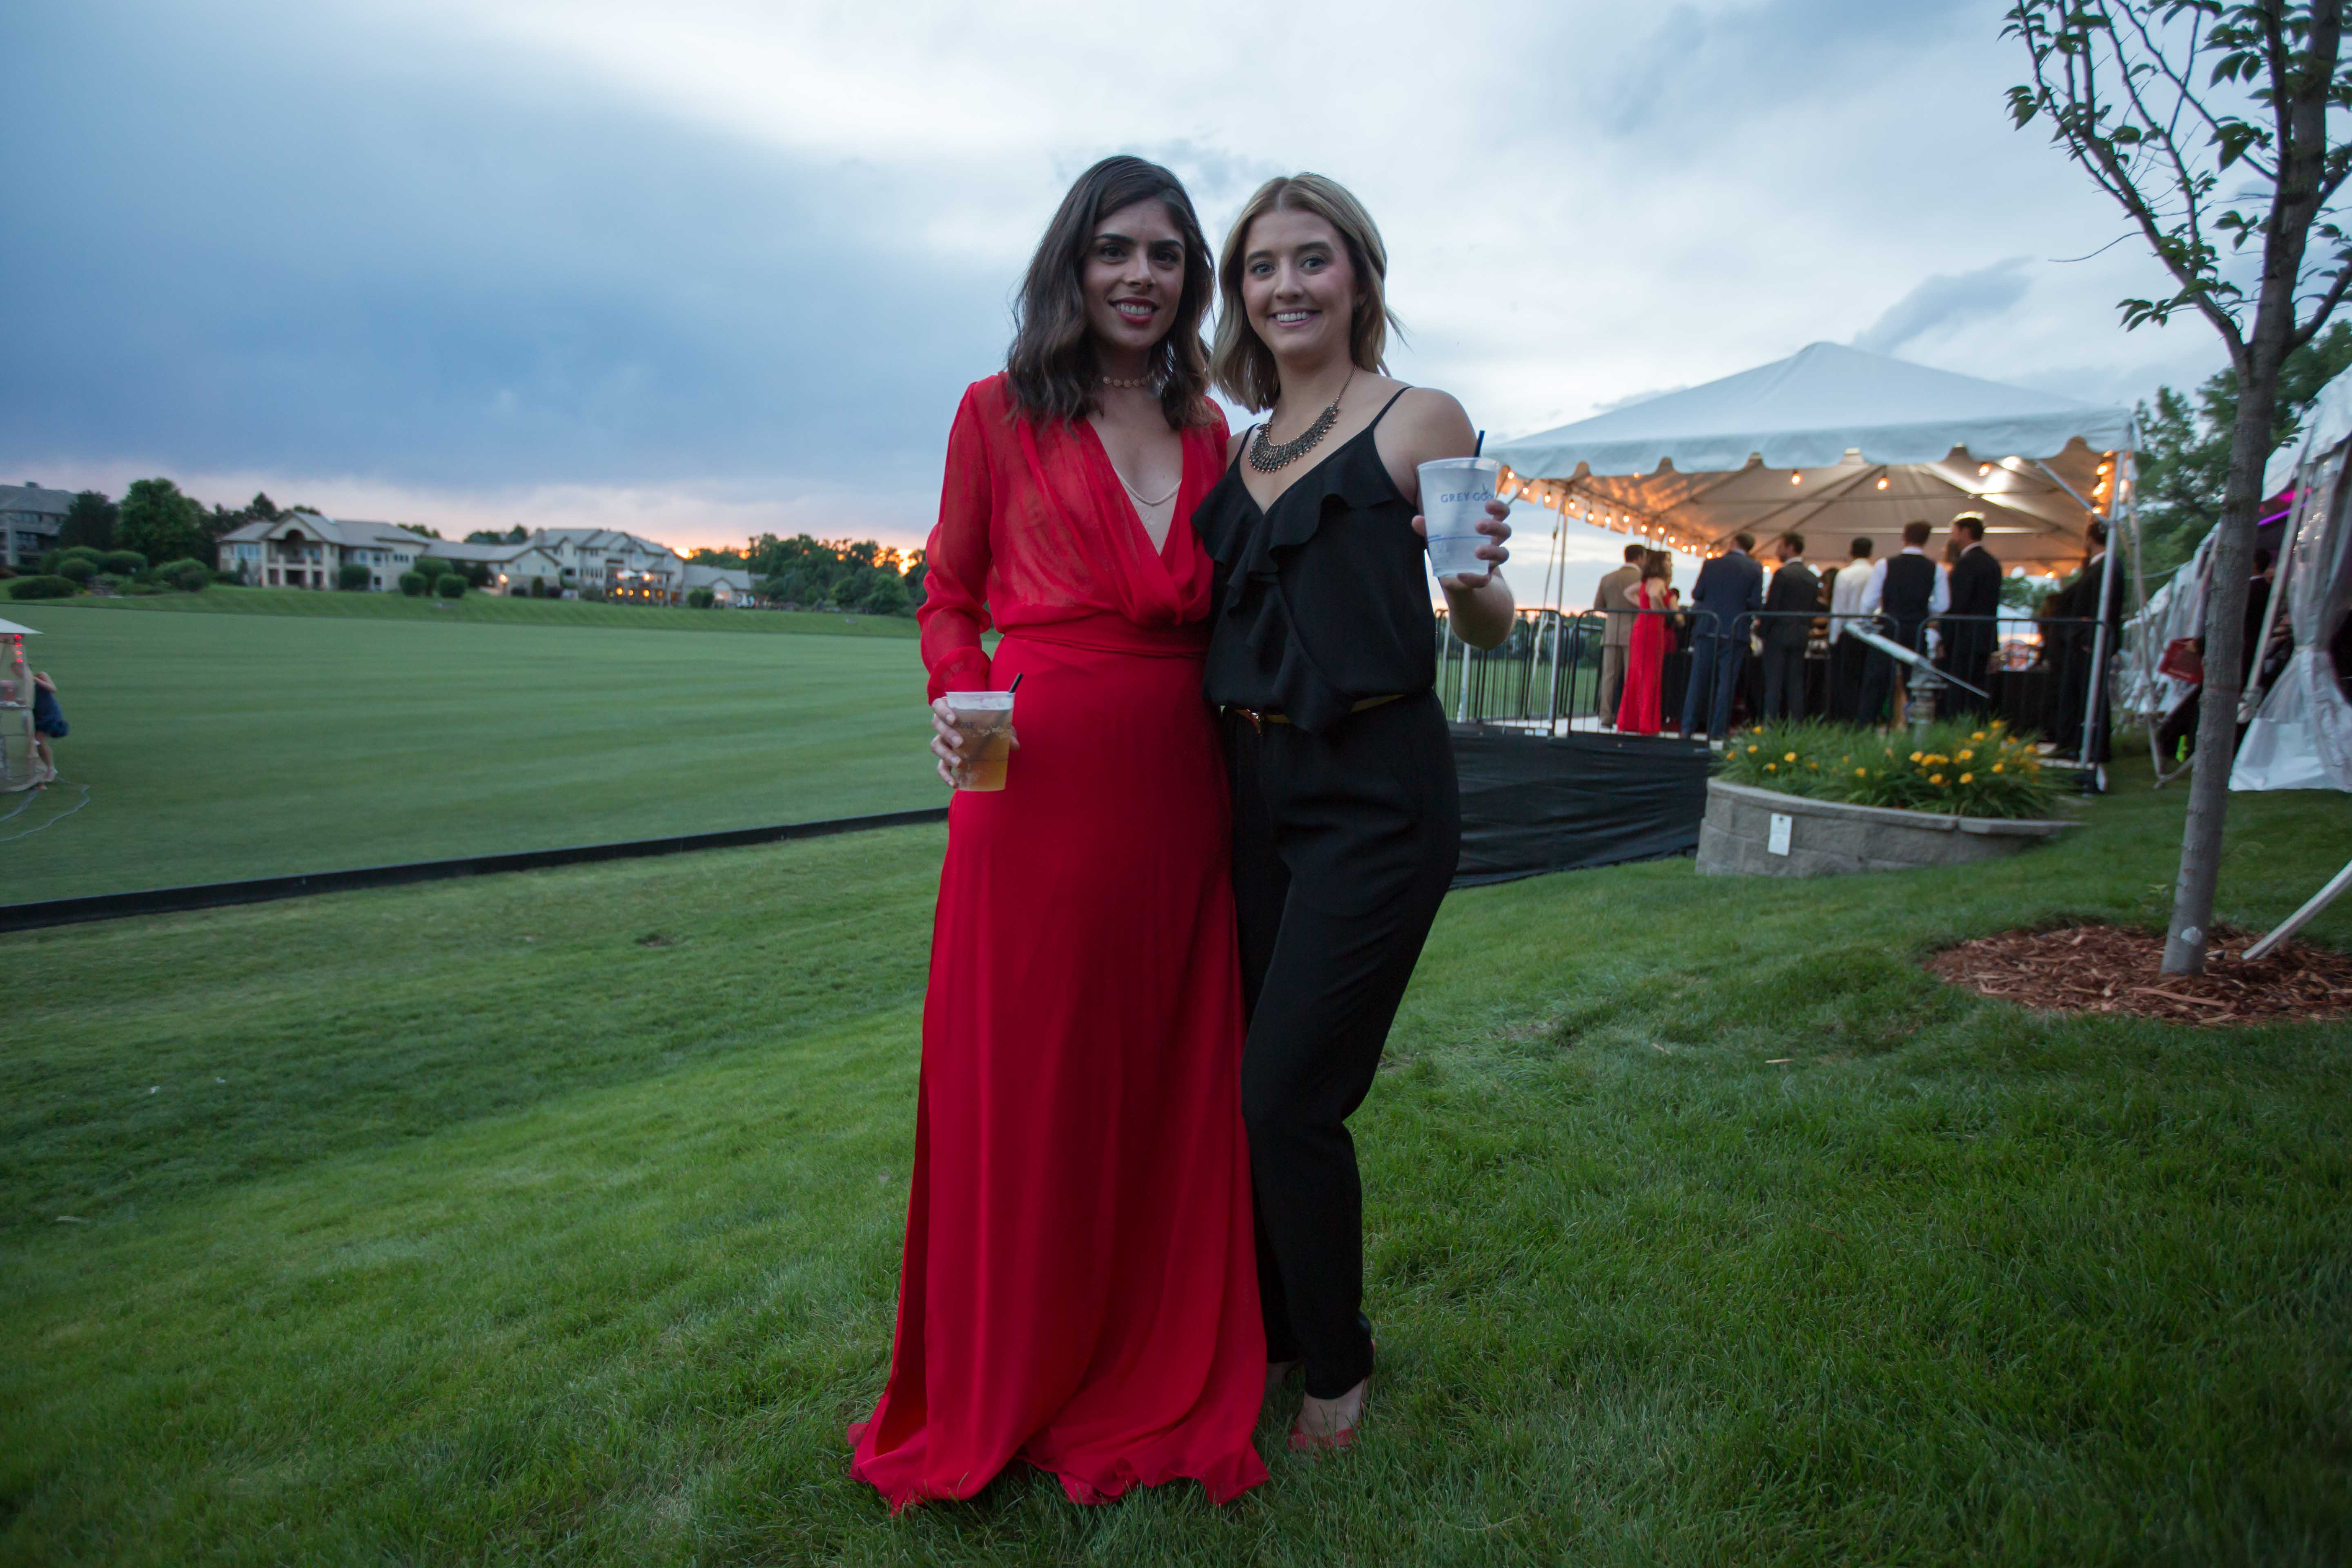 On the left, Veronika Pagan stuns in a red dress from Puerto Rican designer Nicole Vitier while Kady Gundlach rocks a black pantsuit from H&M.